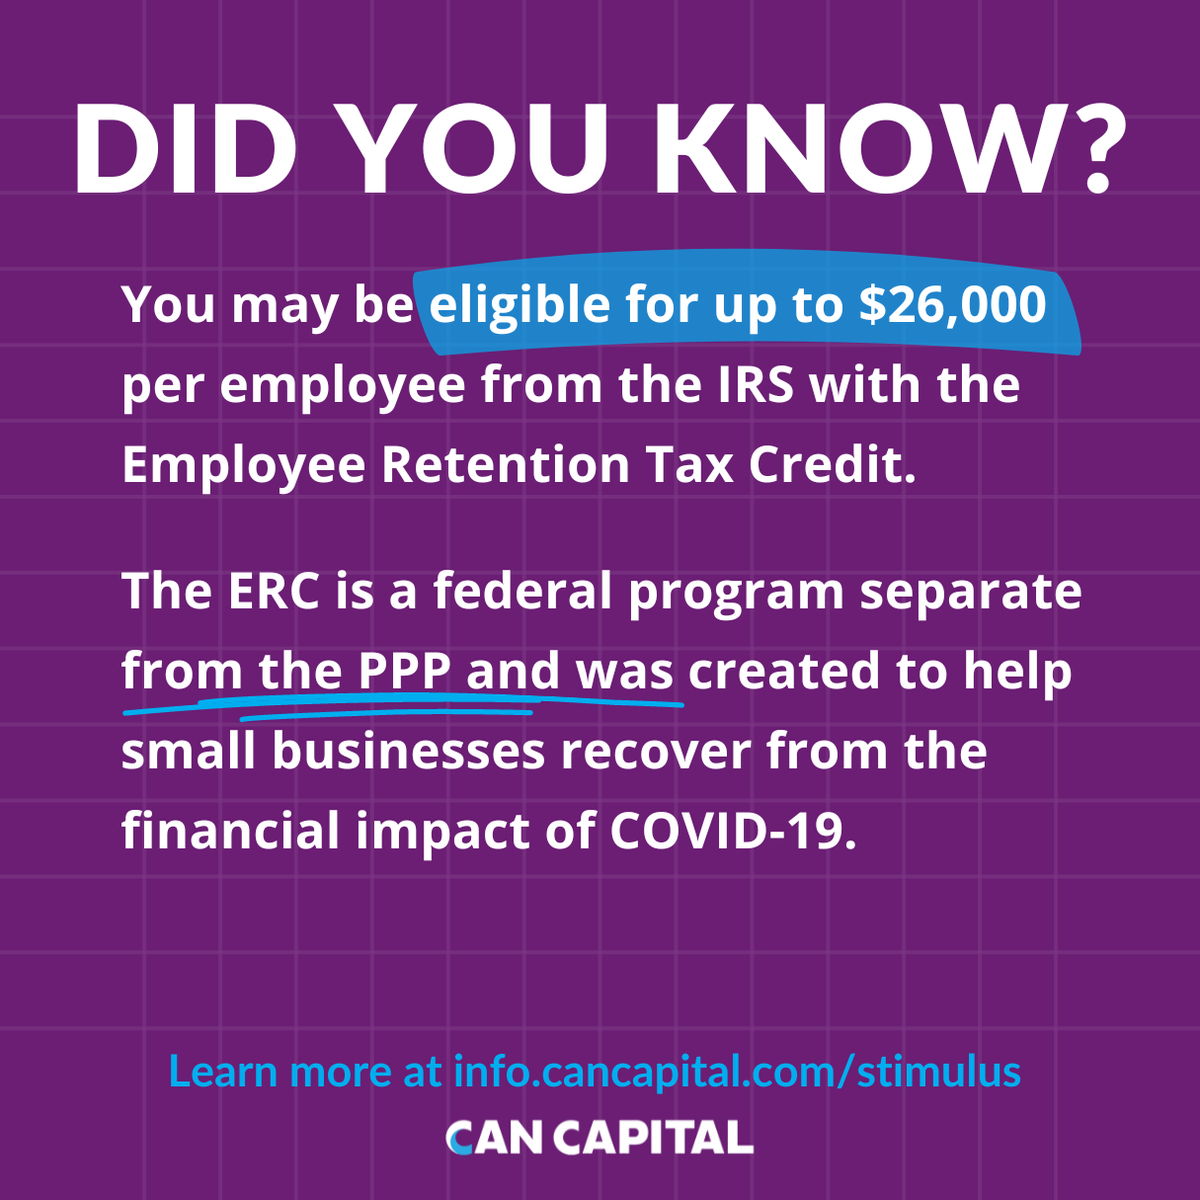 Discover the untapped potential of the Employee Retention Tax Credit (ERC) for your business!  Unlike the Paycheck Protection Program (PPP), the ERC is a refundable tax credit paid directly by the IRS. Learn more: https://t.co/D7mKyYy2zp
#ERC #TaxCredit #FinancialOpportunity https://t.co/iWQPShrKZb